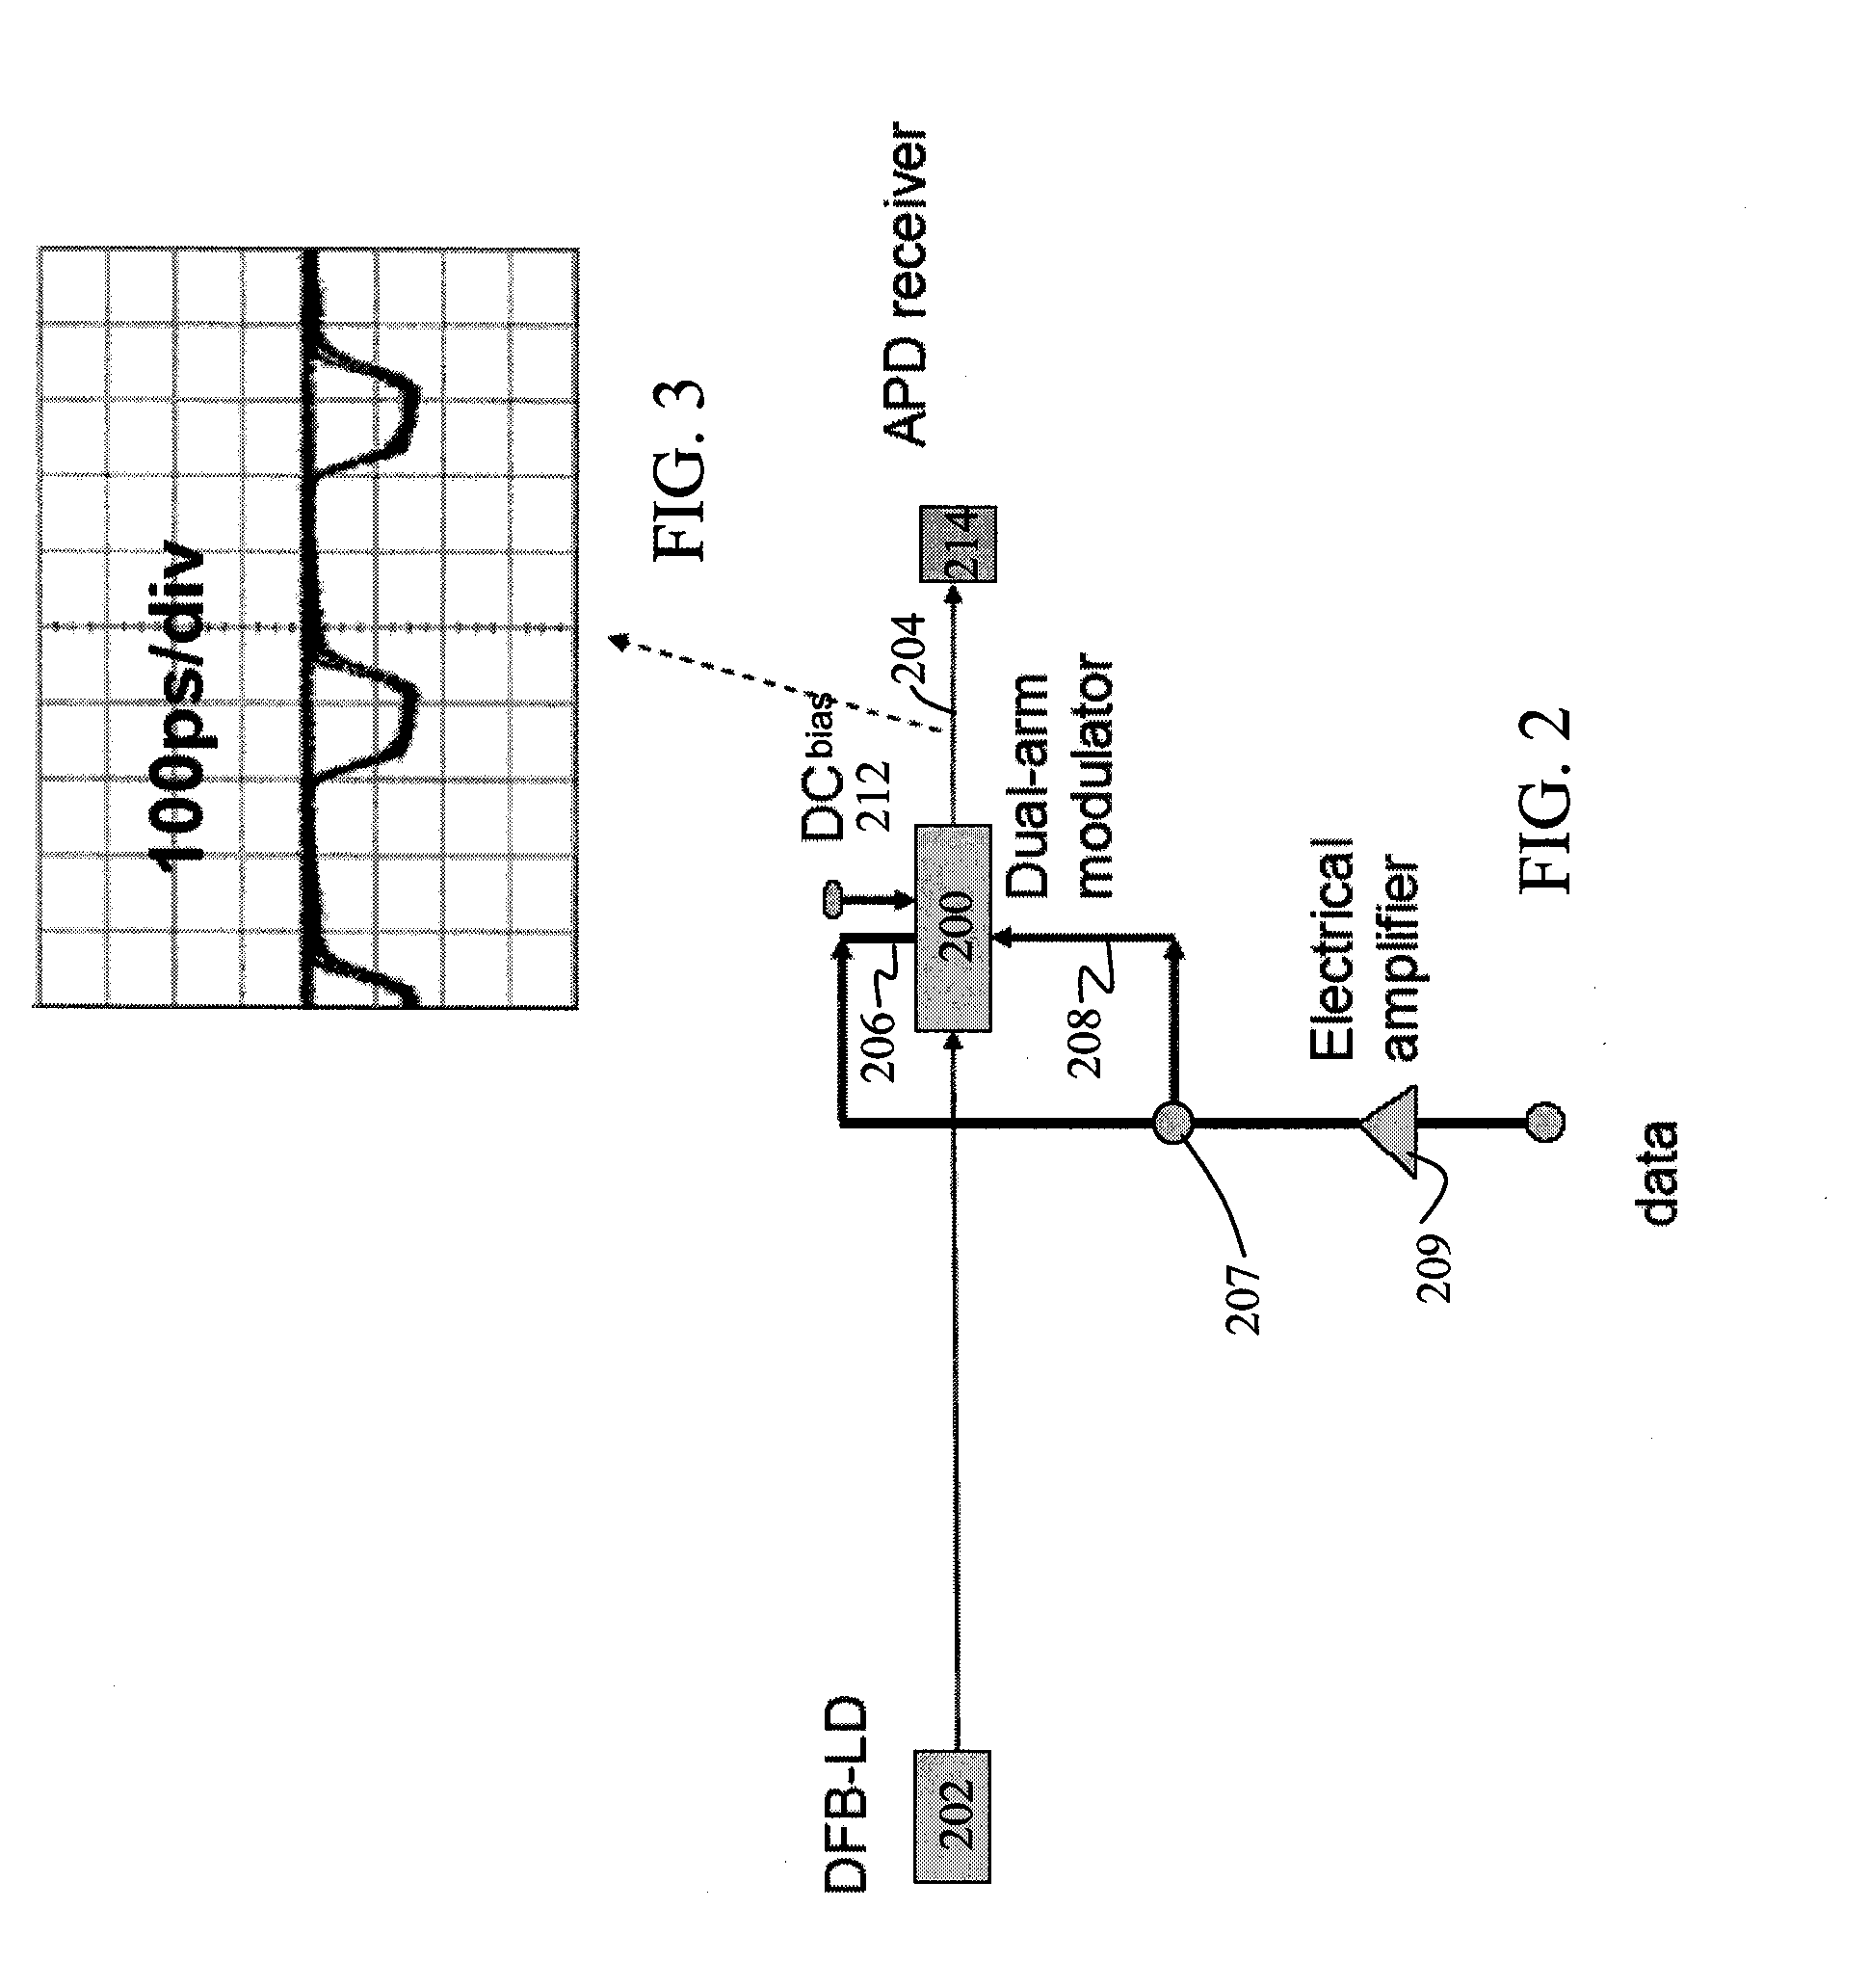 Optical Communication System and Method for Generating Dark Return-to-Zero and DWDM Optical MM-Wave Generation for ROF Downstream Link Using Optical Phase Modulator and Optical Interleaver